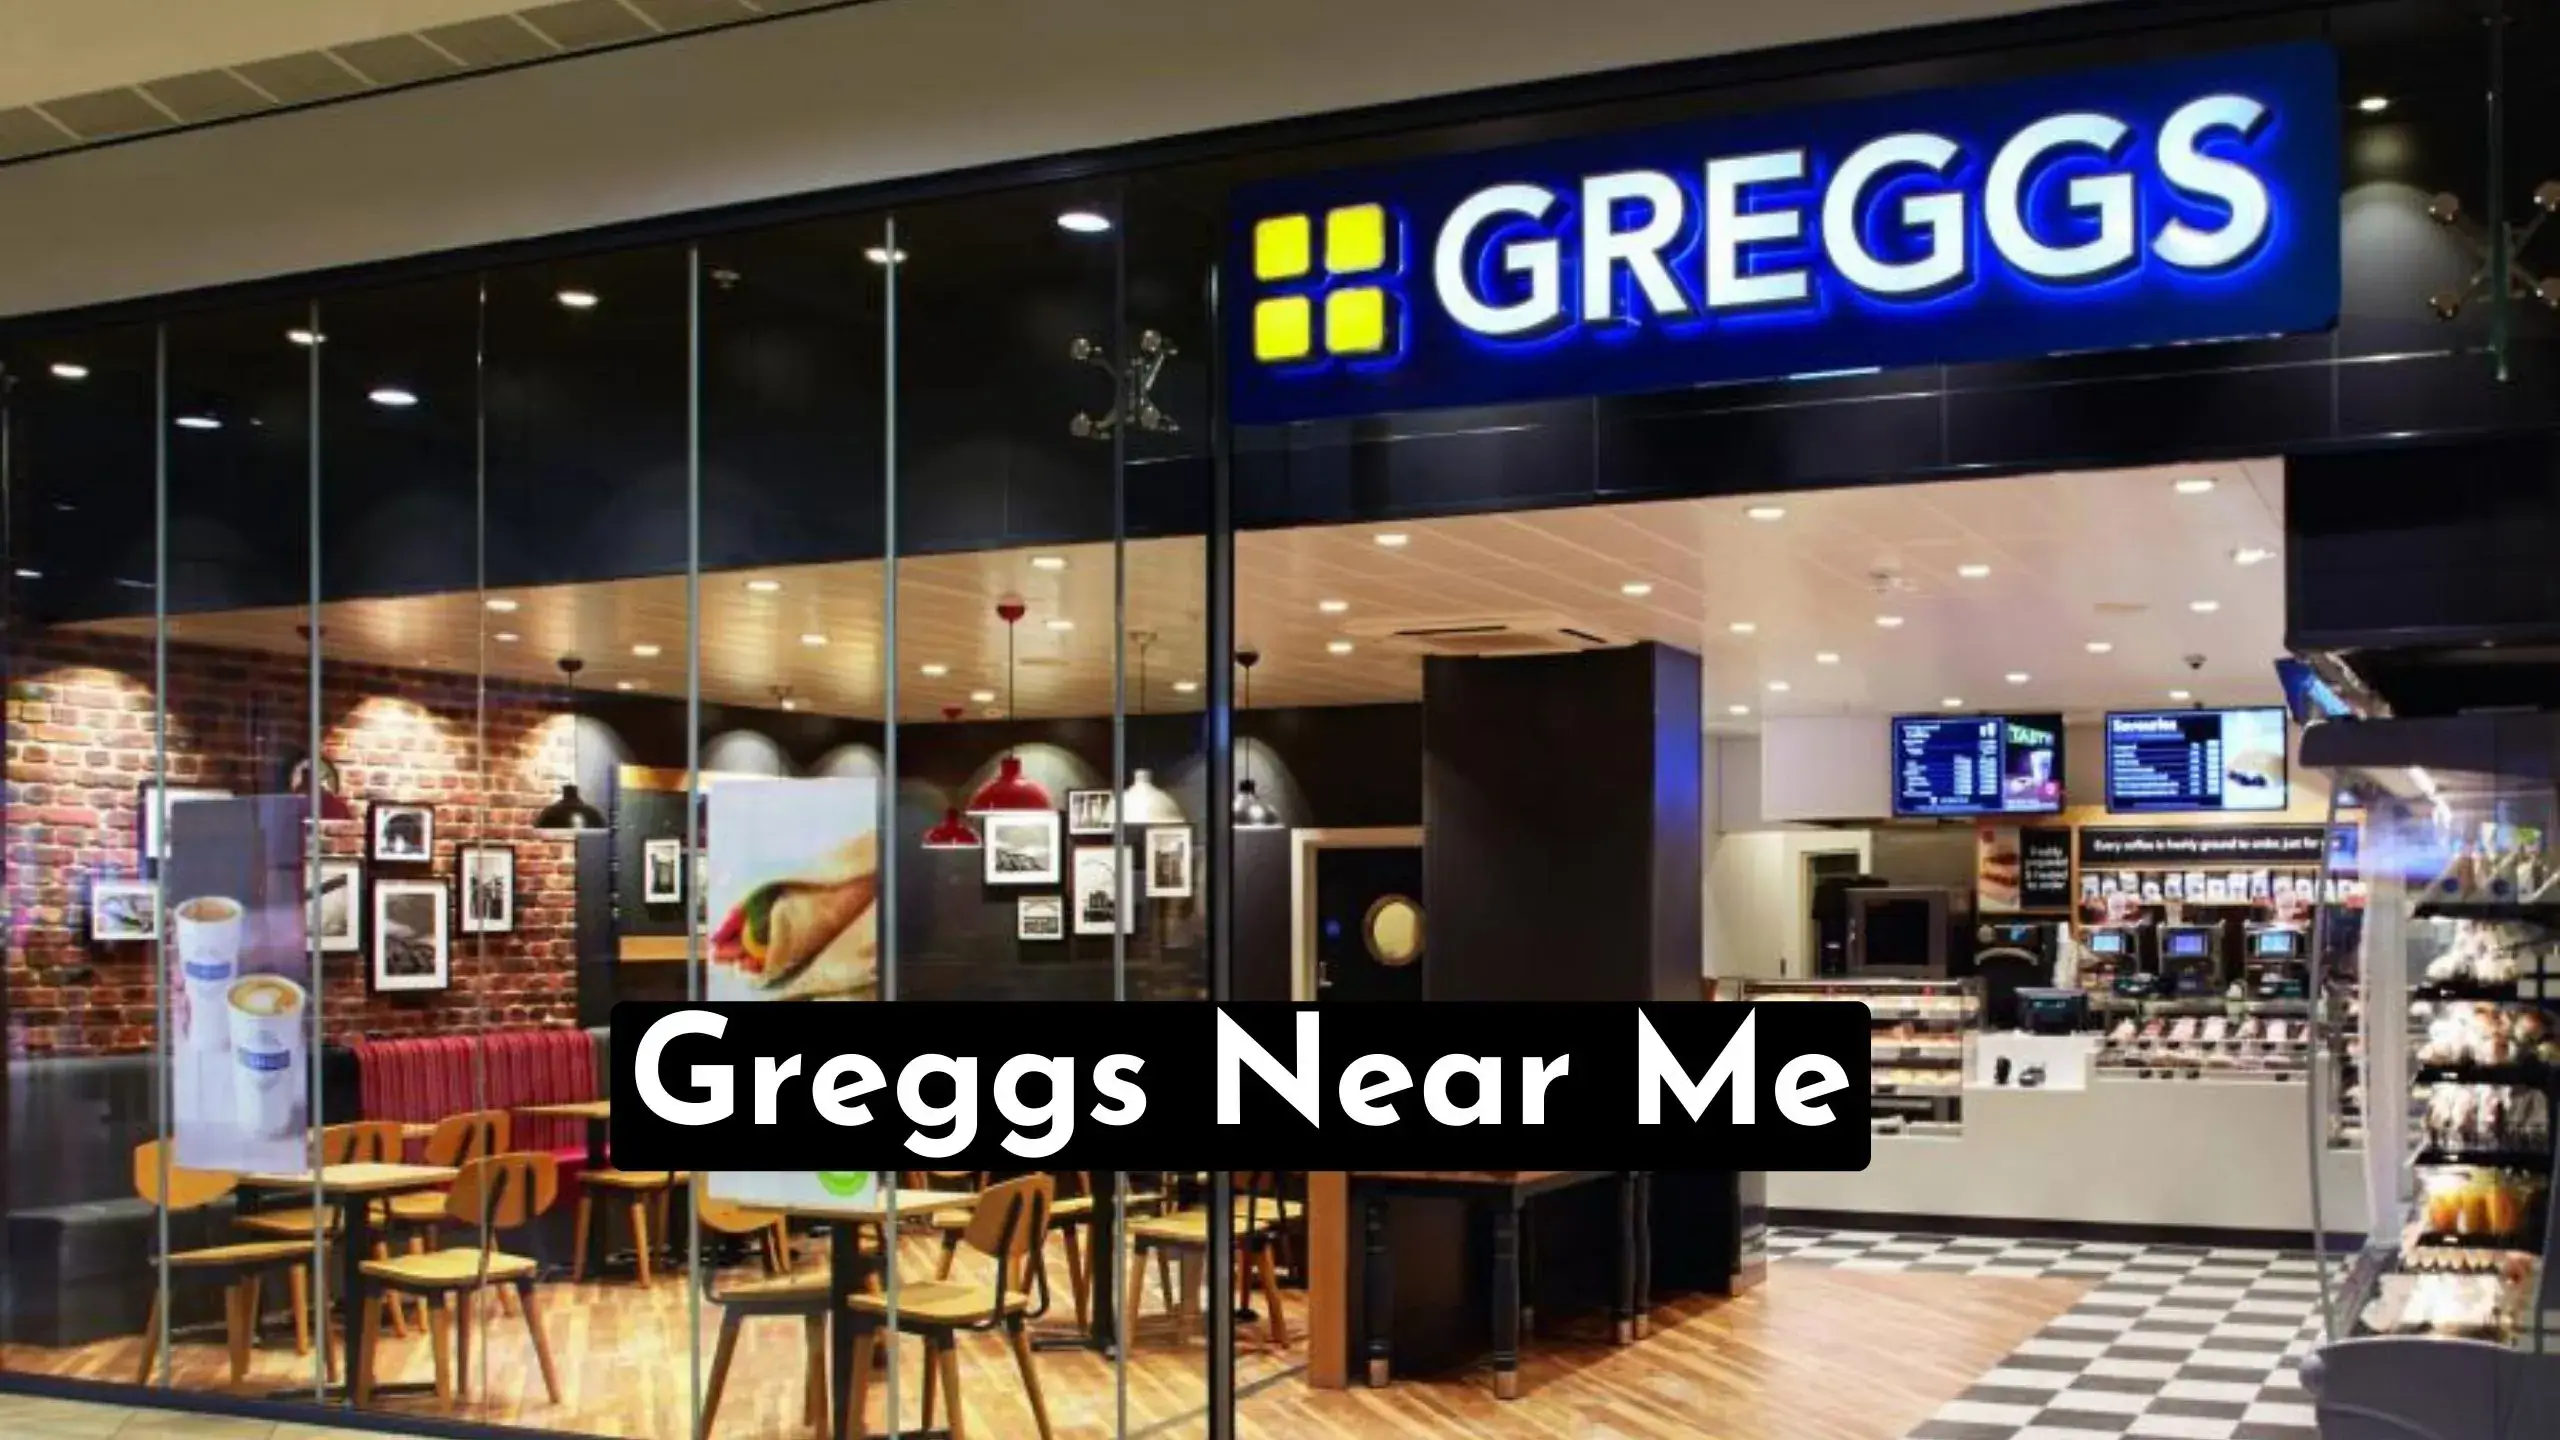 Plan Your Trip Efficiently By Finding Greggs Near Me Locations |Also Find What Are The Most Healthy & Delicious Menu Options| open-near-me.com